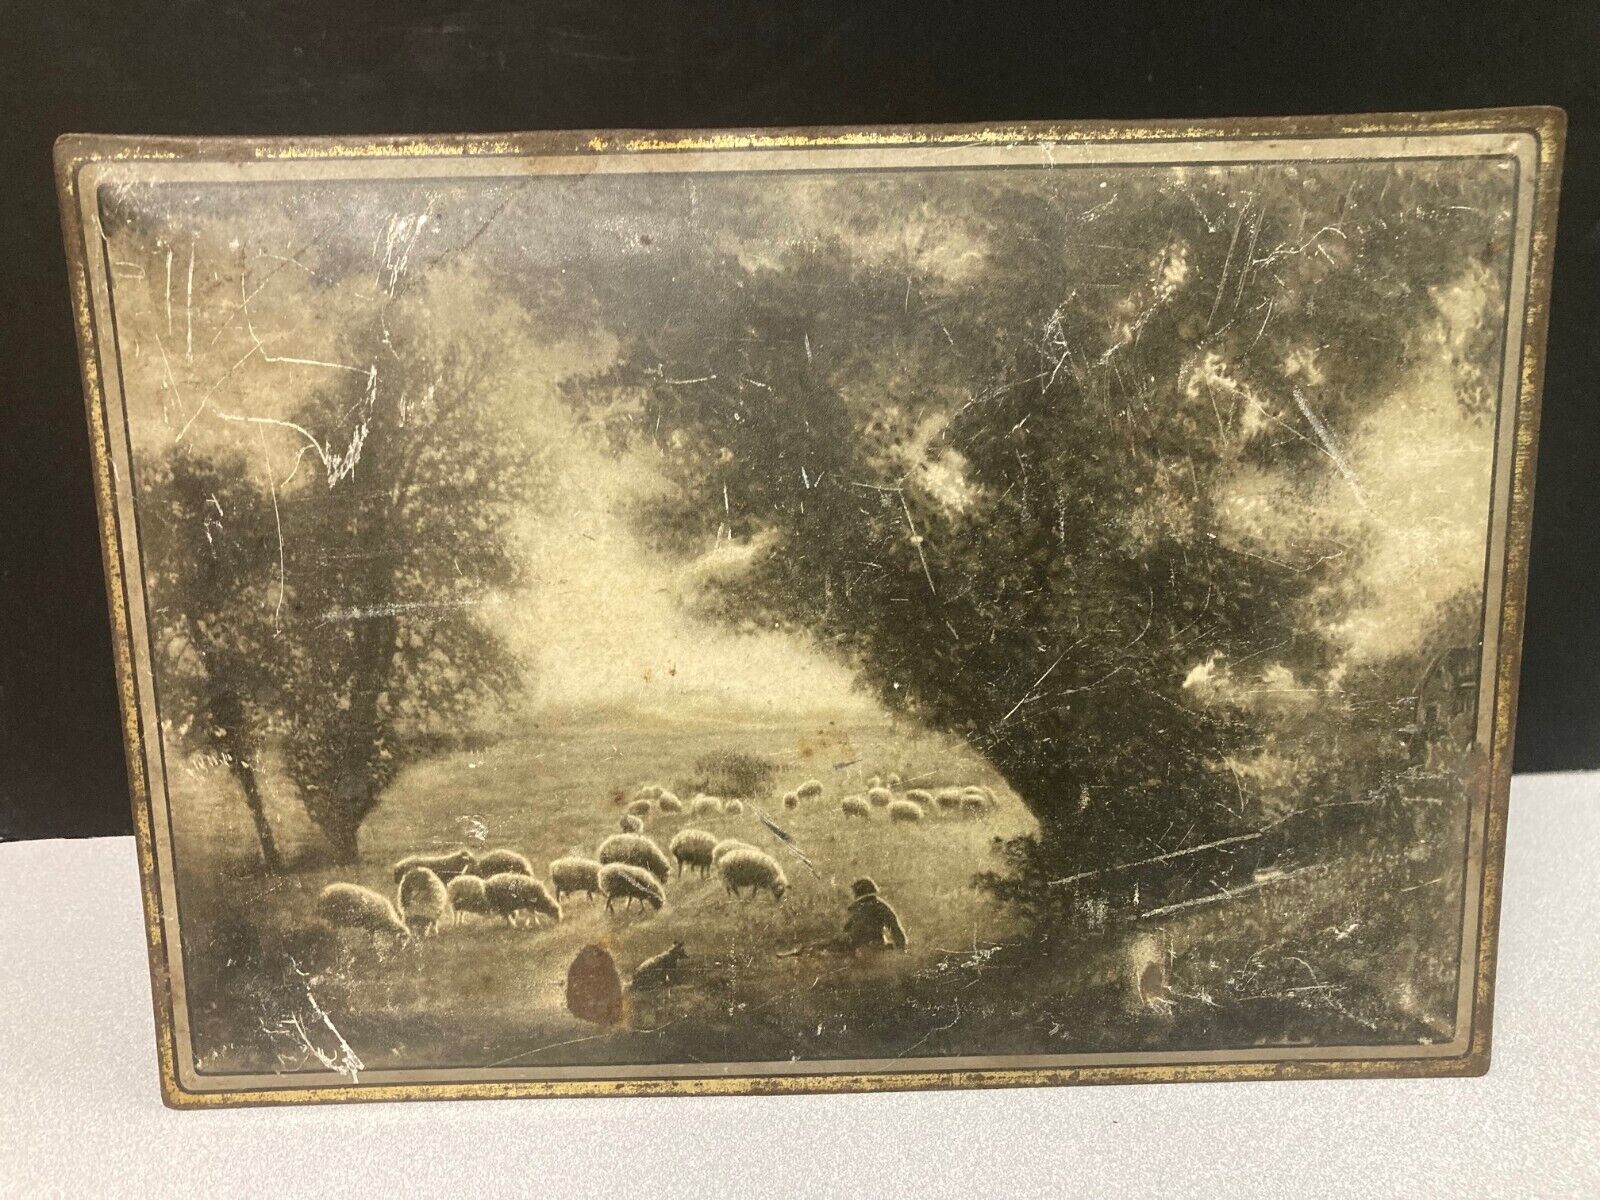 ANTIQUE NBC UNEEDA BISCUIT TIN COUNTRY SETTING MOUNTAINS SHEEP & DOG LITHO